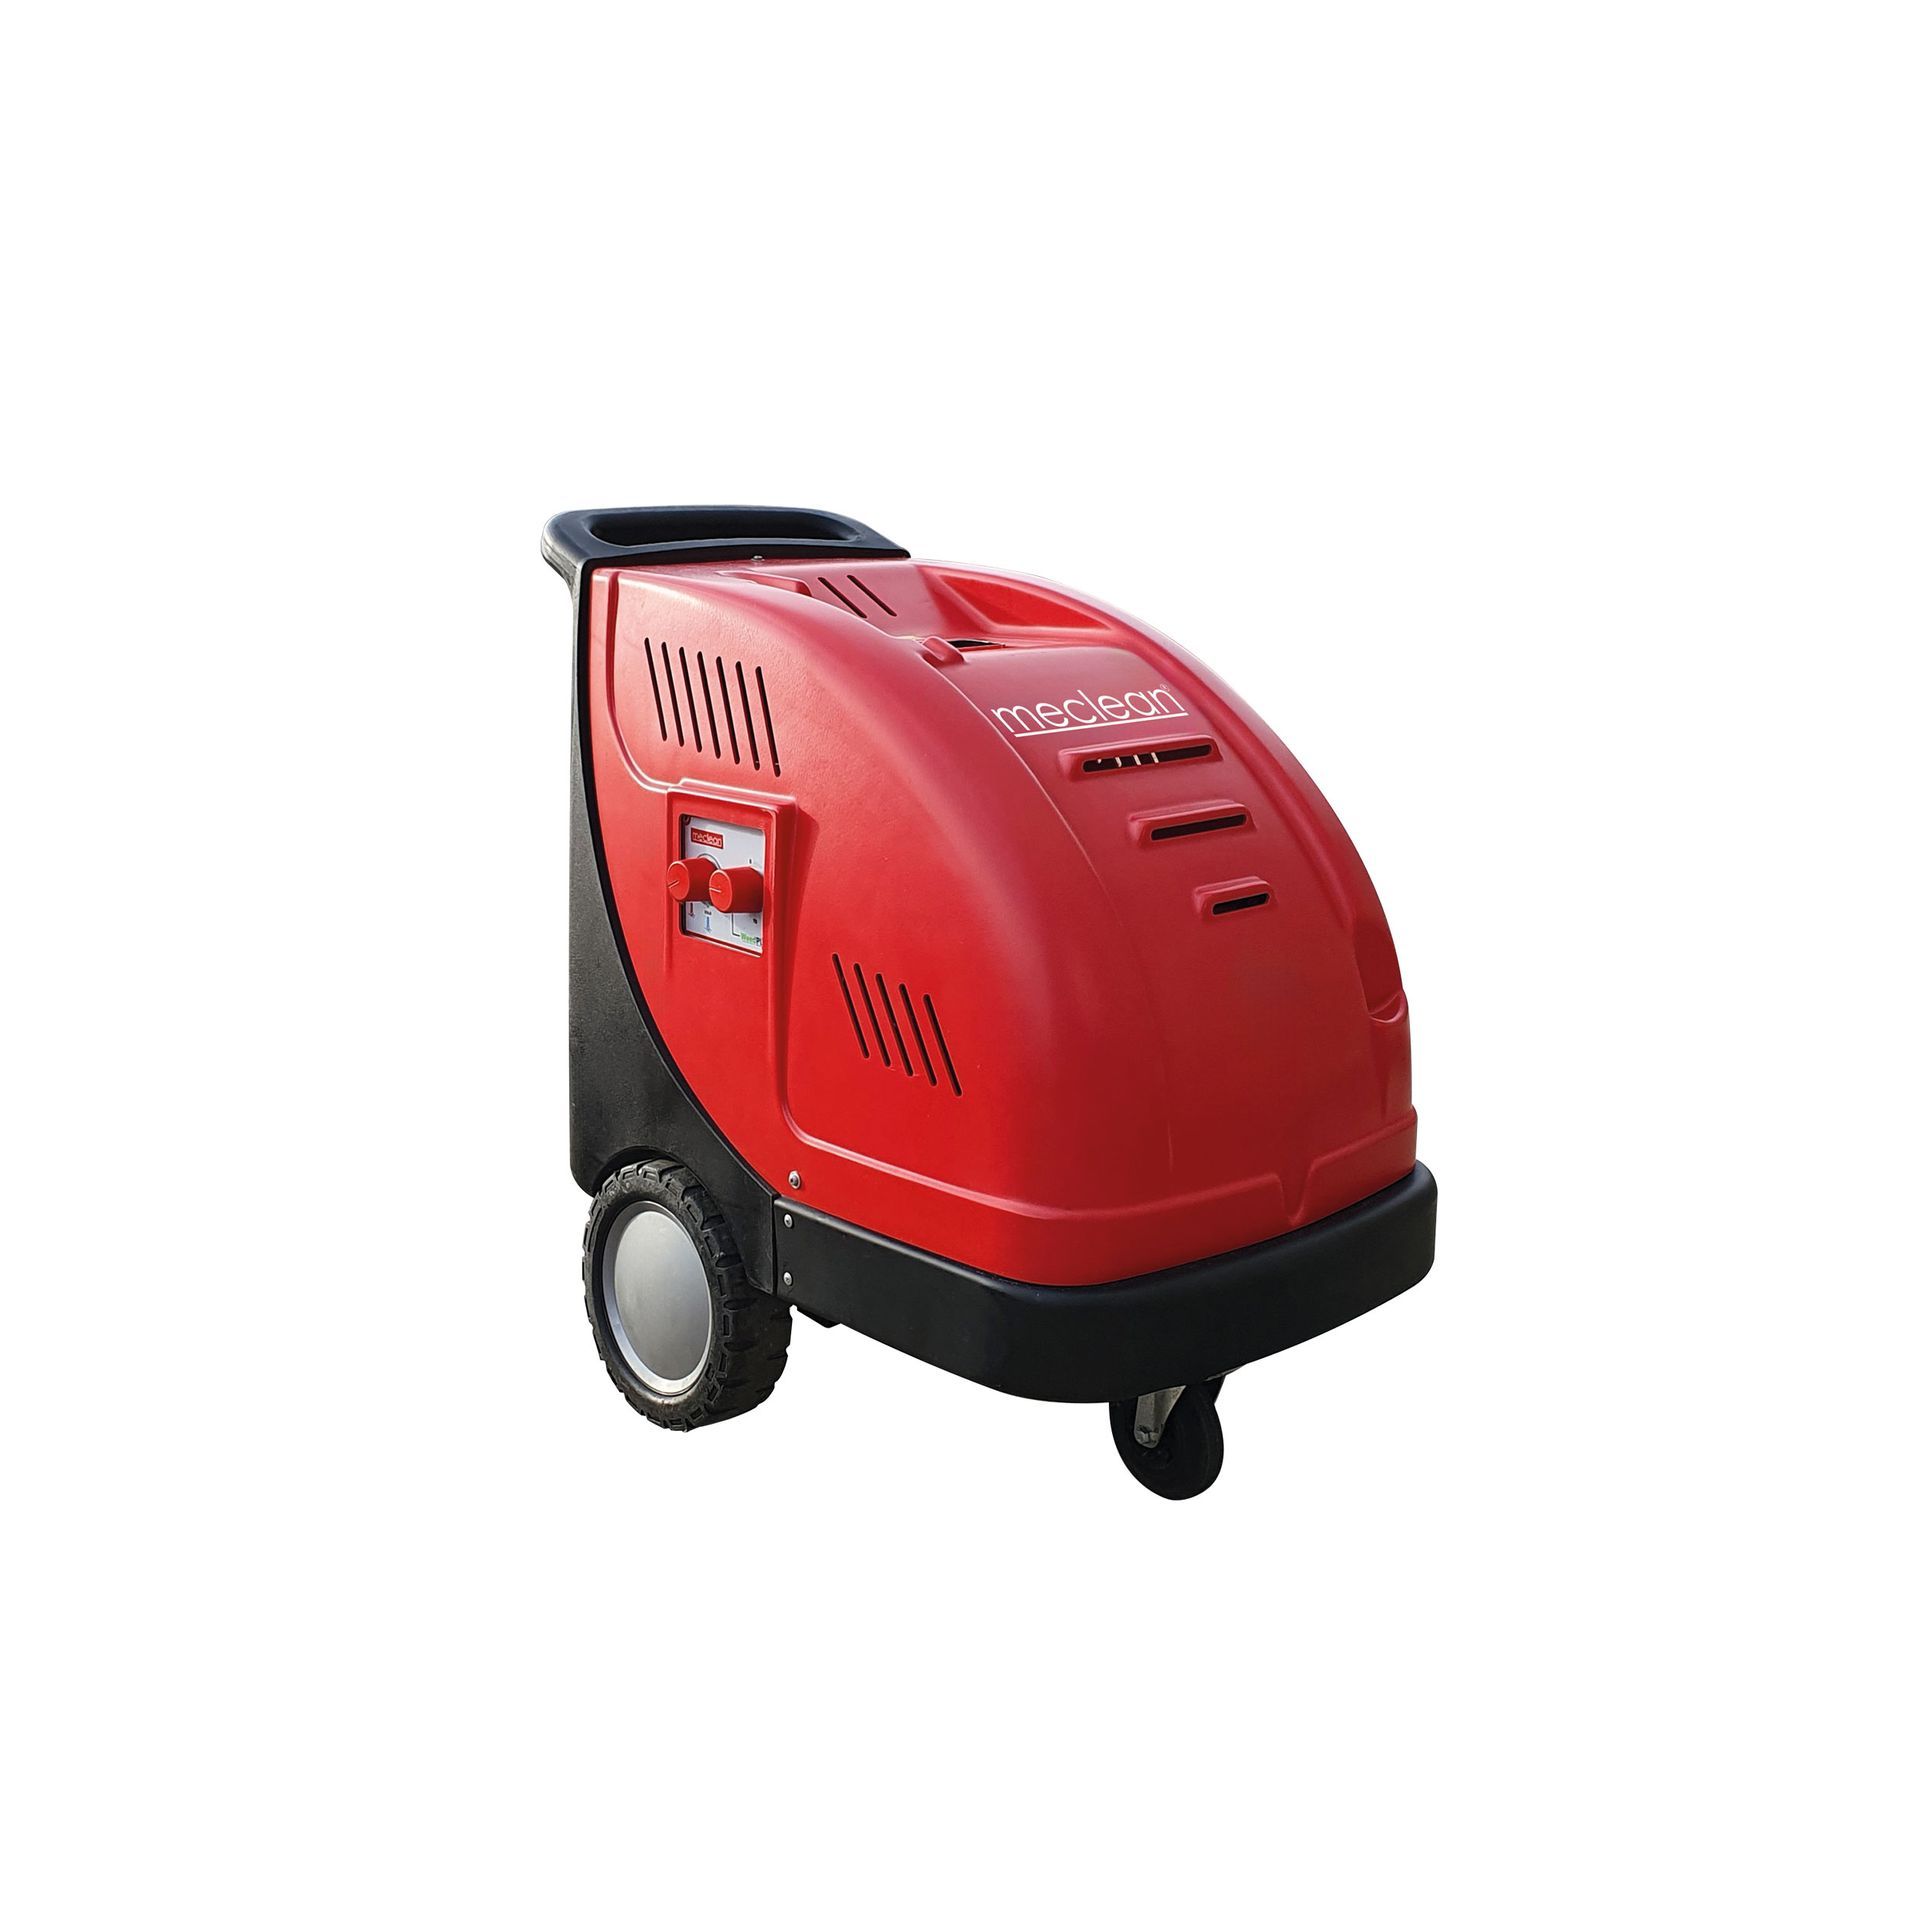 Meclean professional hot water pressure washer SERIE-B 120/8 with WeedPLUS